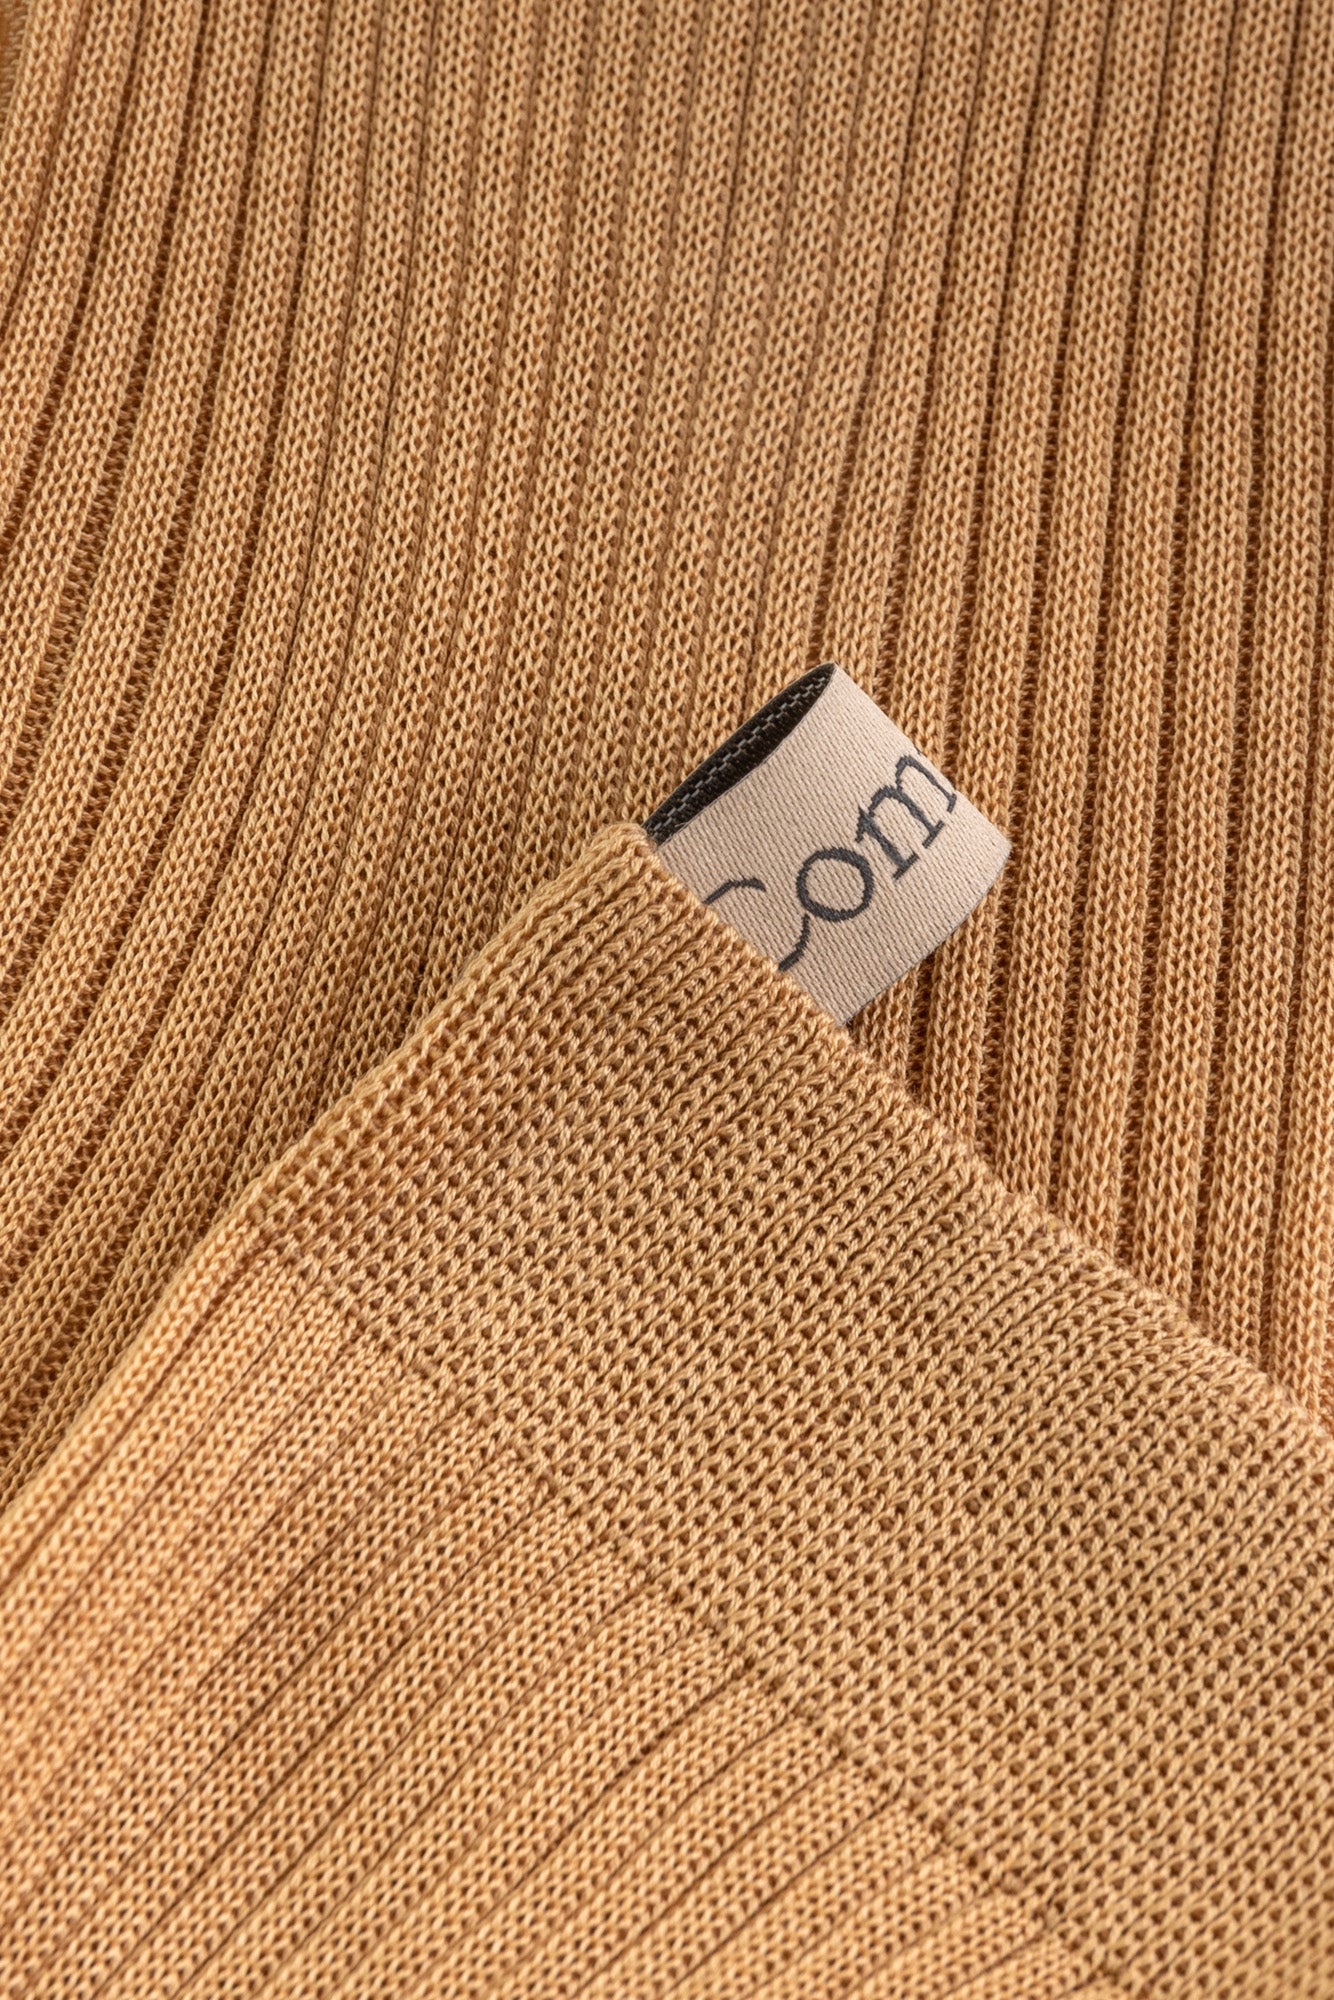 Ribbon tag detail, The Agnelli Sock in Camel, Egyptian Cotton